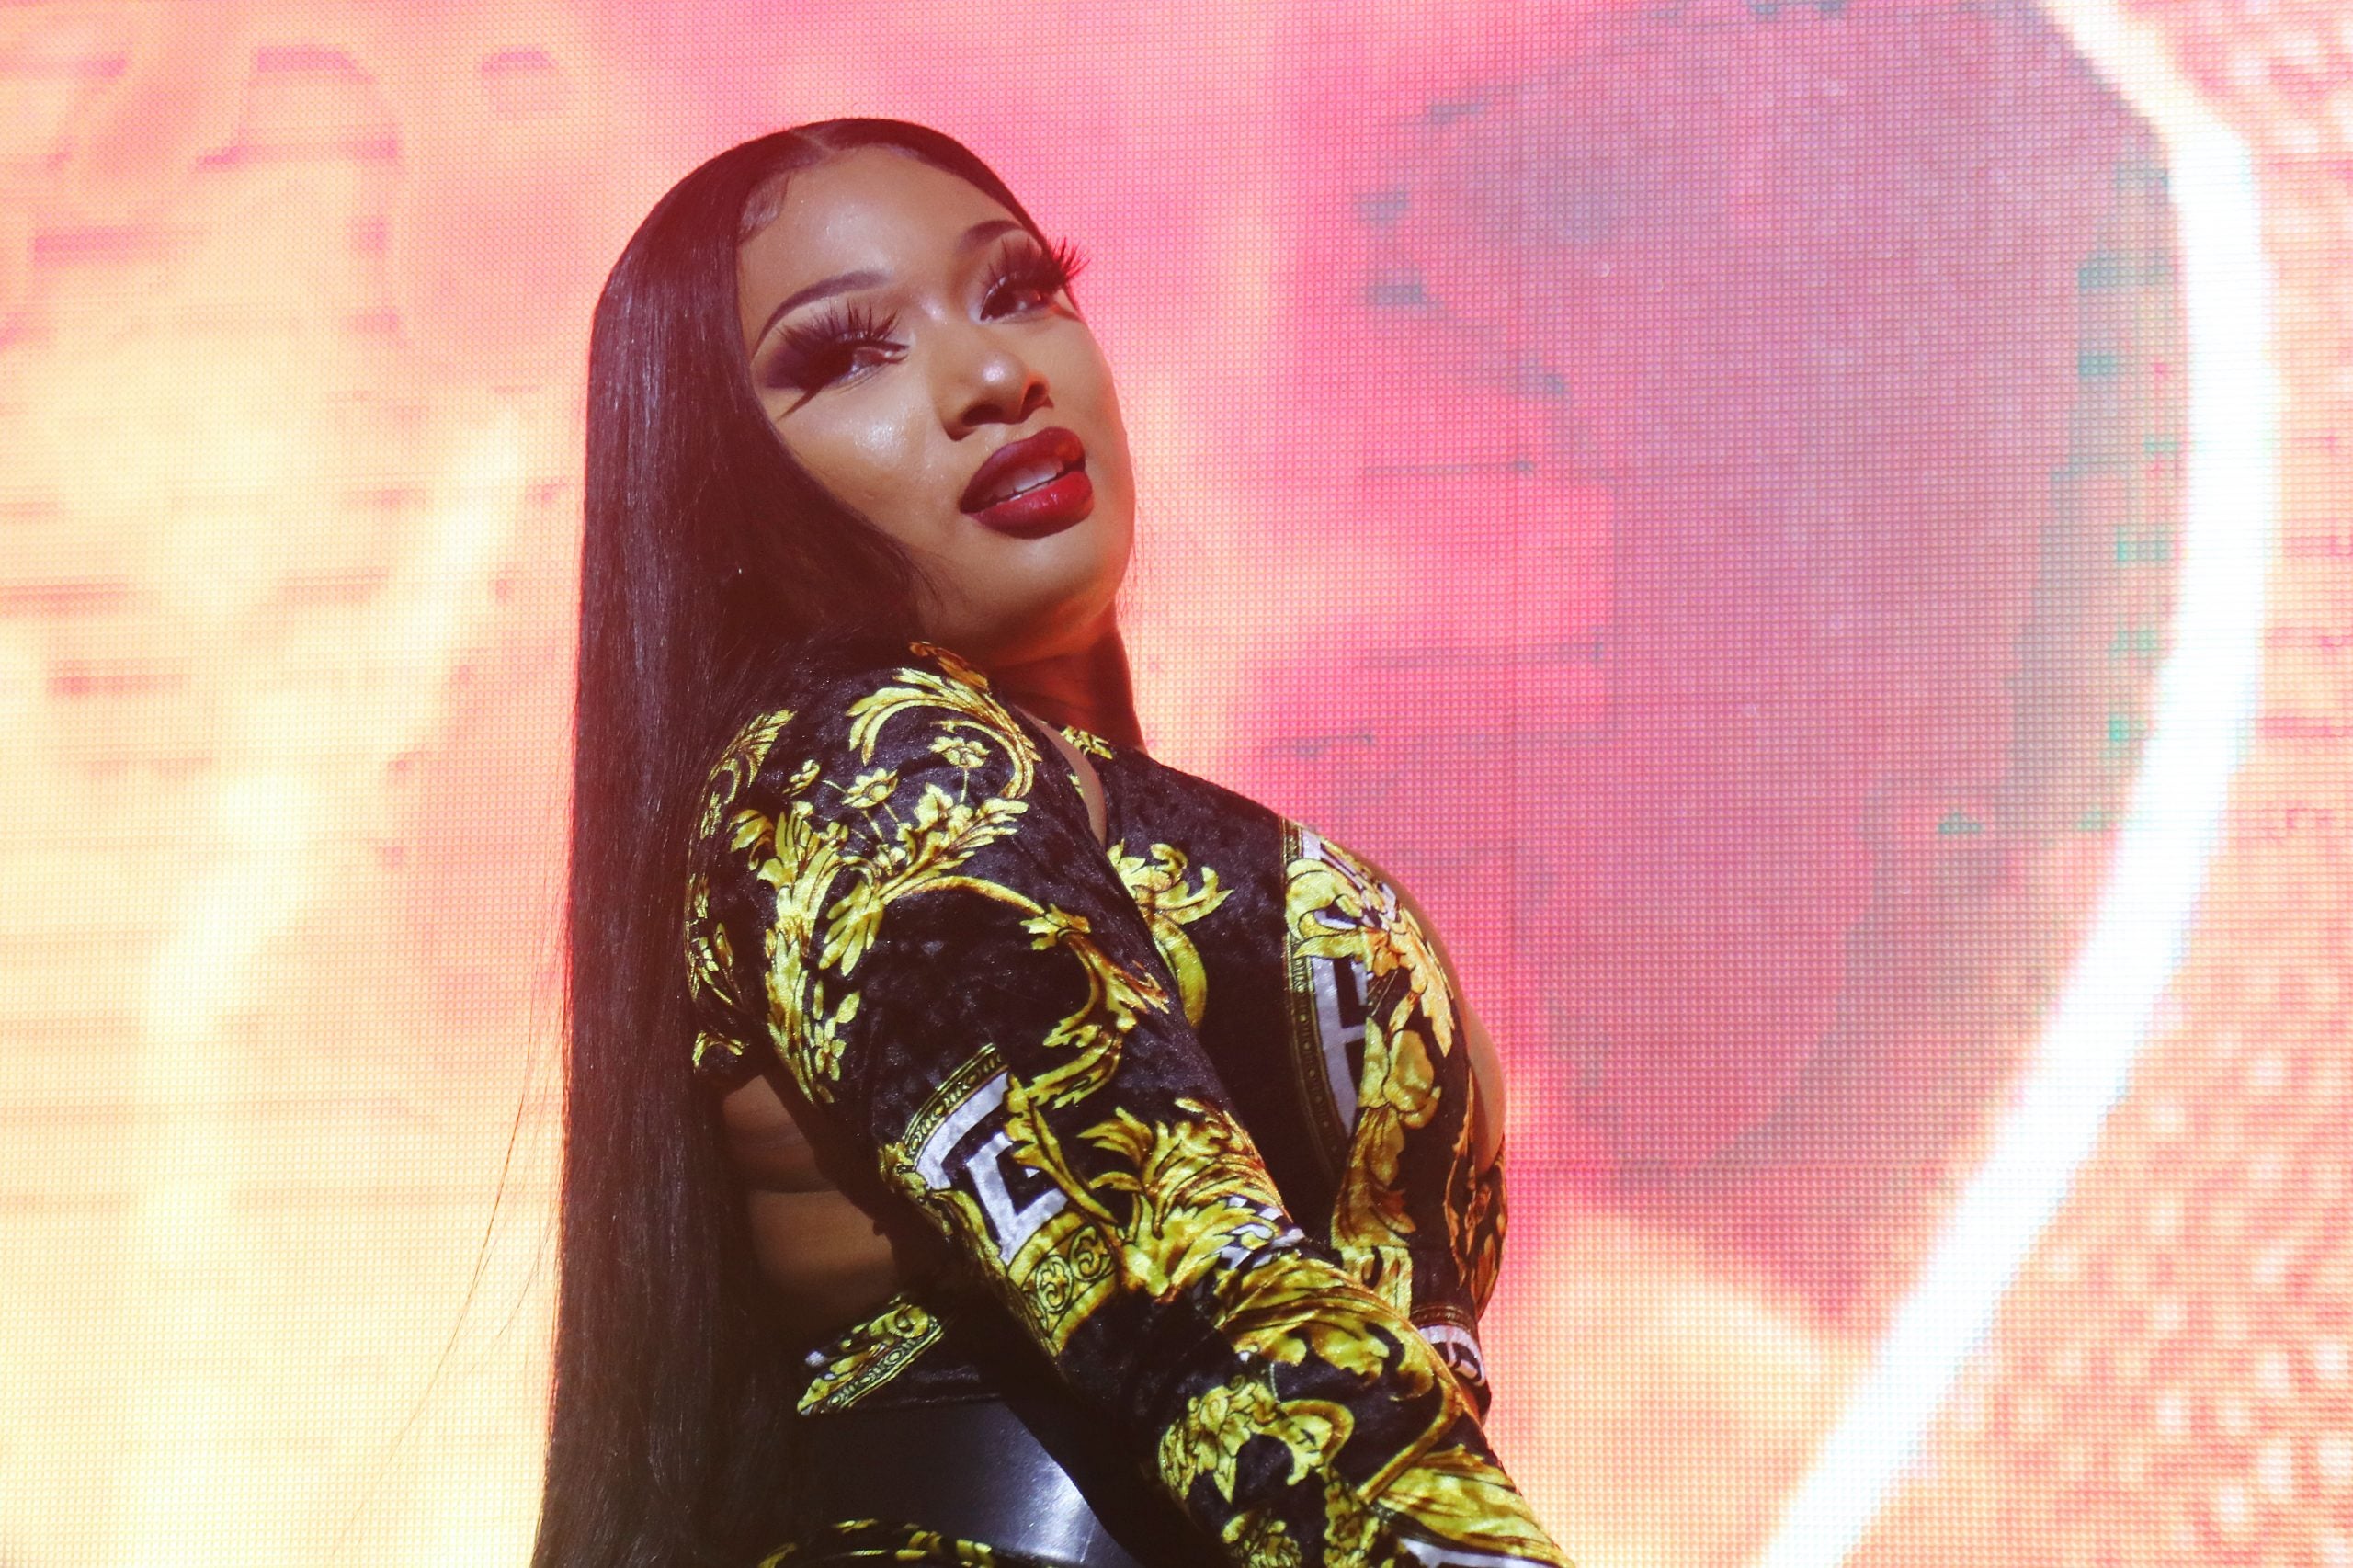 Megan Thee Stallion Sues Record Label After They Attempt To Block Her From Releasing New Music